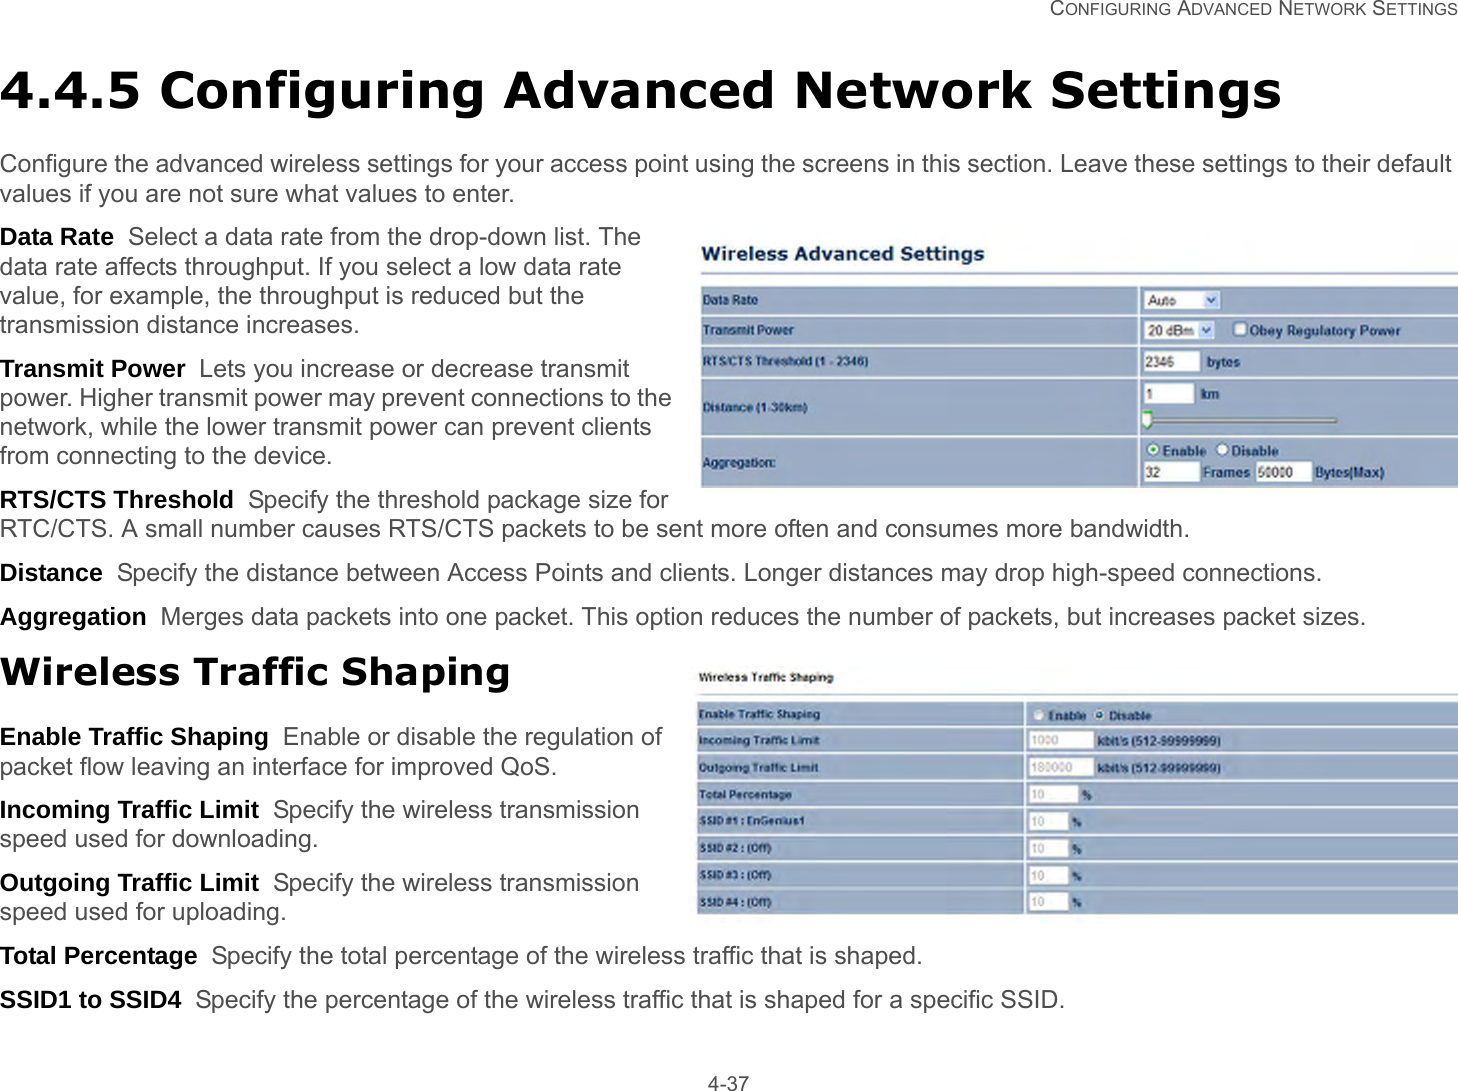   CONFIGURING ADVANCED NETWORK SETTINGS 4-374.4.5 Configuring Advanced Network SettingsConfigure the advanced wireless settings for your access point using the screens in this section. Leave these settings to their default values if you are not sure what values to enter.Data Rate  Select a data rate from the drop-down list. The data rate affects throughput. If you select a low data rate value, for example, the throughput is reduced but the transmission distance increases.Transmit Power  Lets you increase or decrease transmit power. Higher transmit power may prevent connections to the network, while the lower transmit power can prevent clients from connecting to the device.RTS/CTS Threshold  Specify the threshold package size for RTC/CTS. A small number causes RTS/CTS packets to be sent more often and consumes more bandwidth.Distance  Specify the distance between Access Points and clients. Longer distances may drop high-speed connections.Aggregation  Merges data packets into one packet. This option reduces the number of packets, but increases packet sizes.Wireless Traffic ShapingEnable Traffic Shaping  Enable or disable the regulation of packet flow leaving an interface for improved QoS.Incoming Traffic Limit  Specify the wireless transmission speed used for downloading.Outgoing Traffic Limit  Specify the wireless transmission speed used for uploading.Total Percentage  Specify the total percentage of the wireless traffic that is shaped.SSID1 to SSID4  Specify the percentage of the wireless traffic that is shaped for a specific SSID.